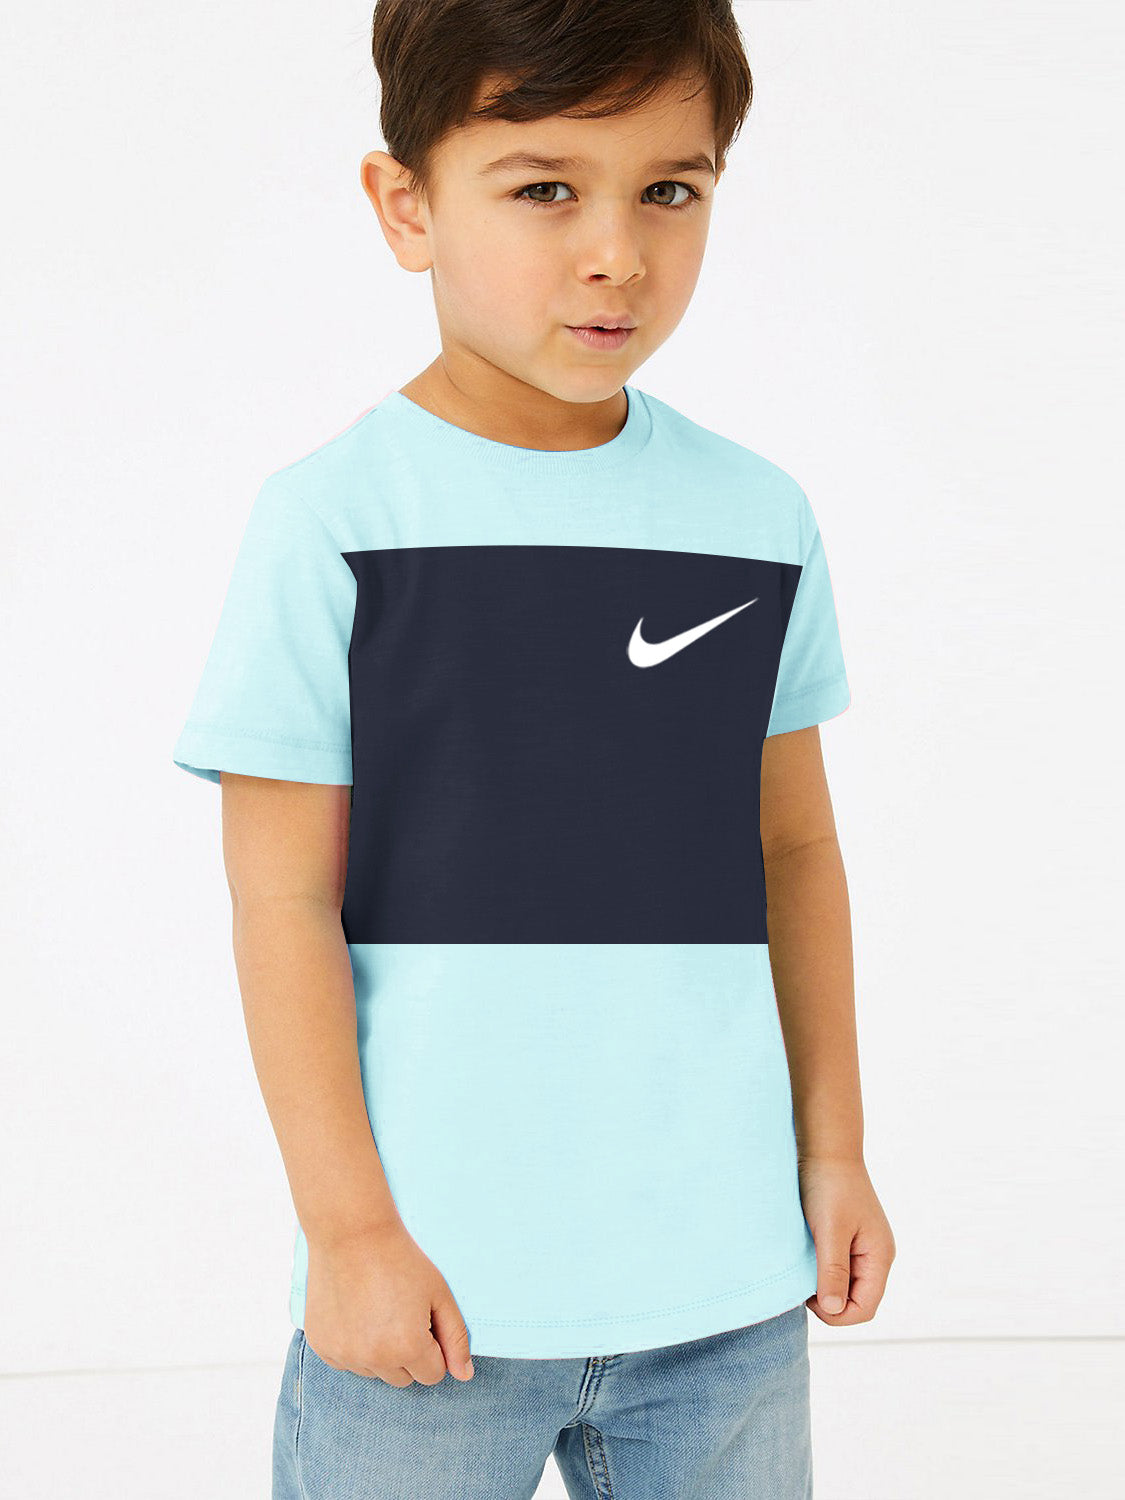 NK Crew Neck Single Jersey Tee Shirt For Kids-Blue with Navy Panel-SP2264